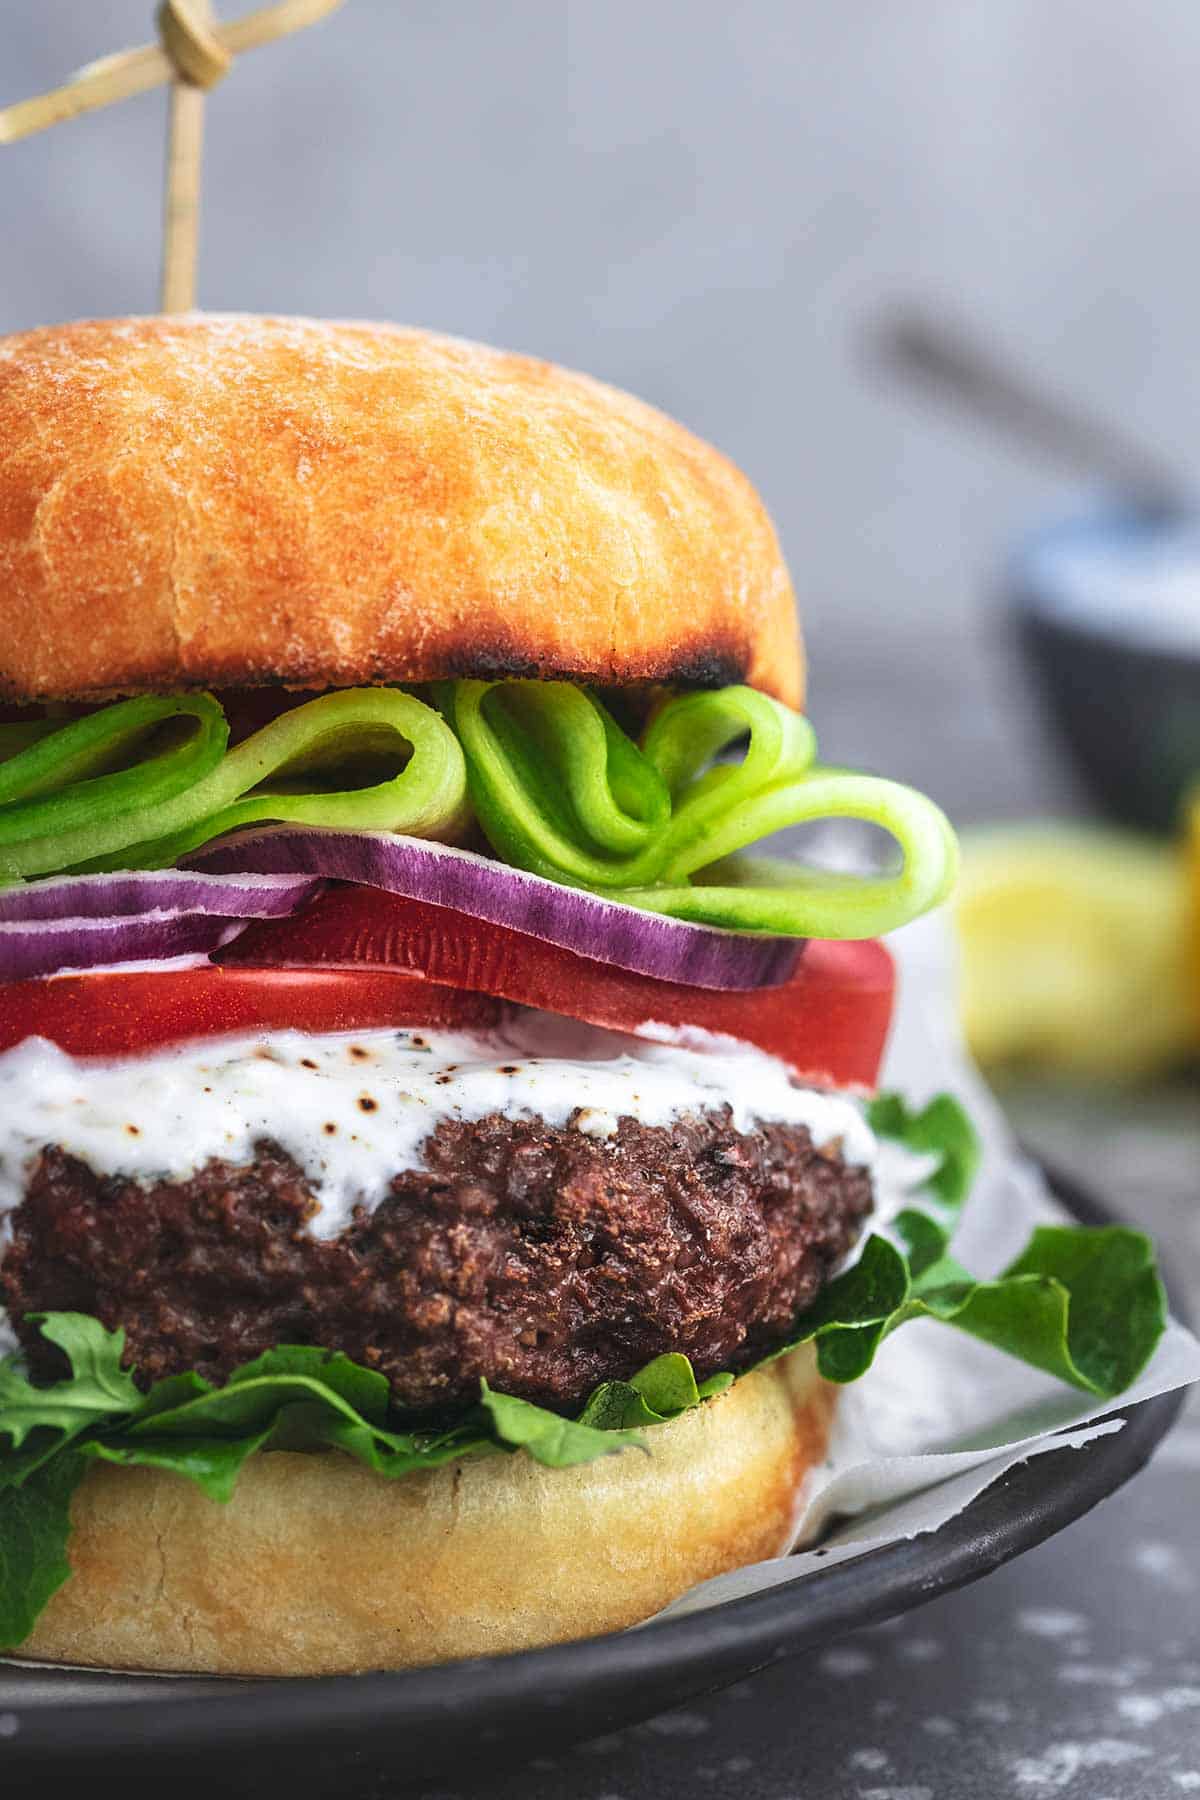 Fire Up The Grill For Our Favorite Burger Recipes